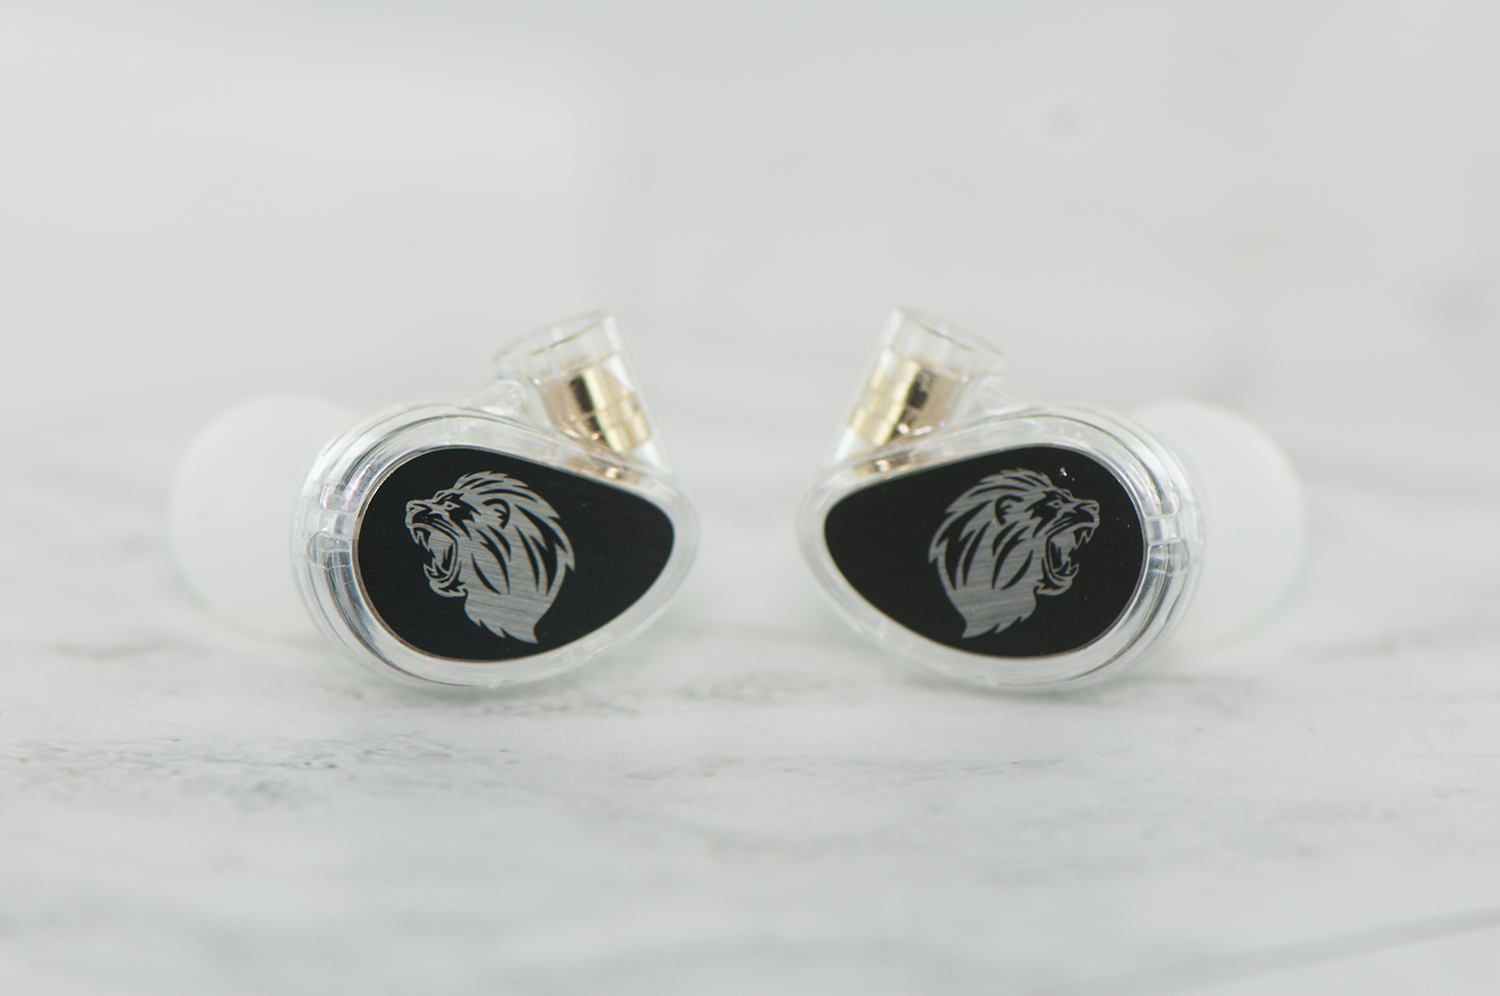 Two high-end in-ear monitors with a lion emblem on a black background, displayed on a marble surface.